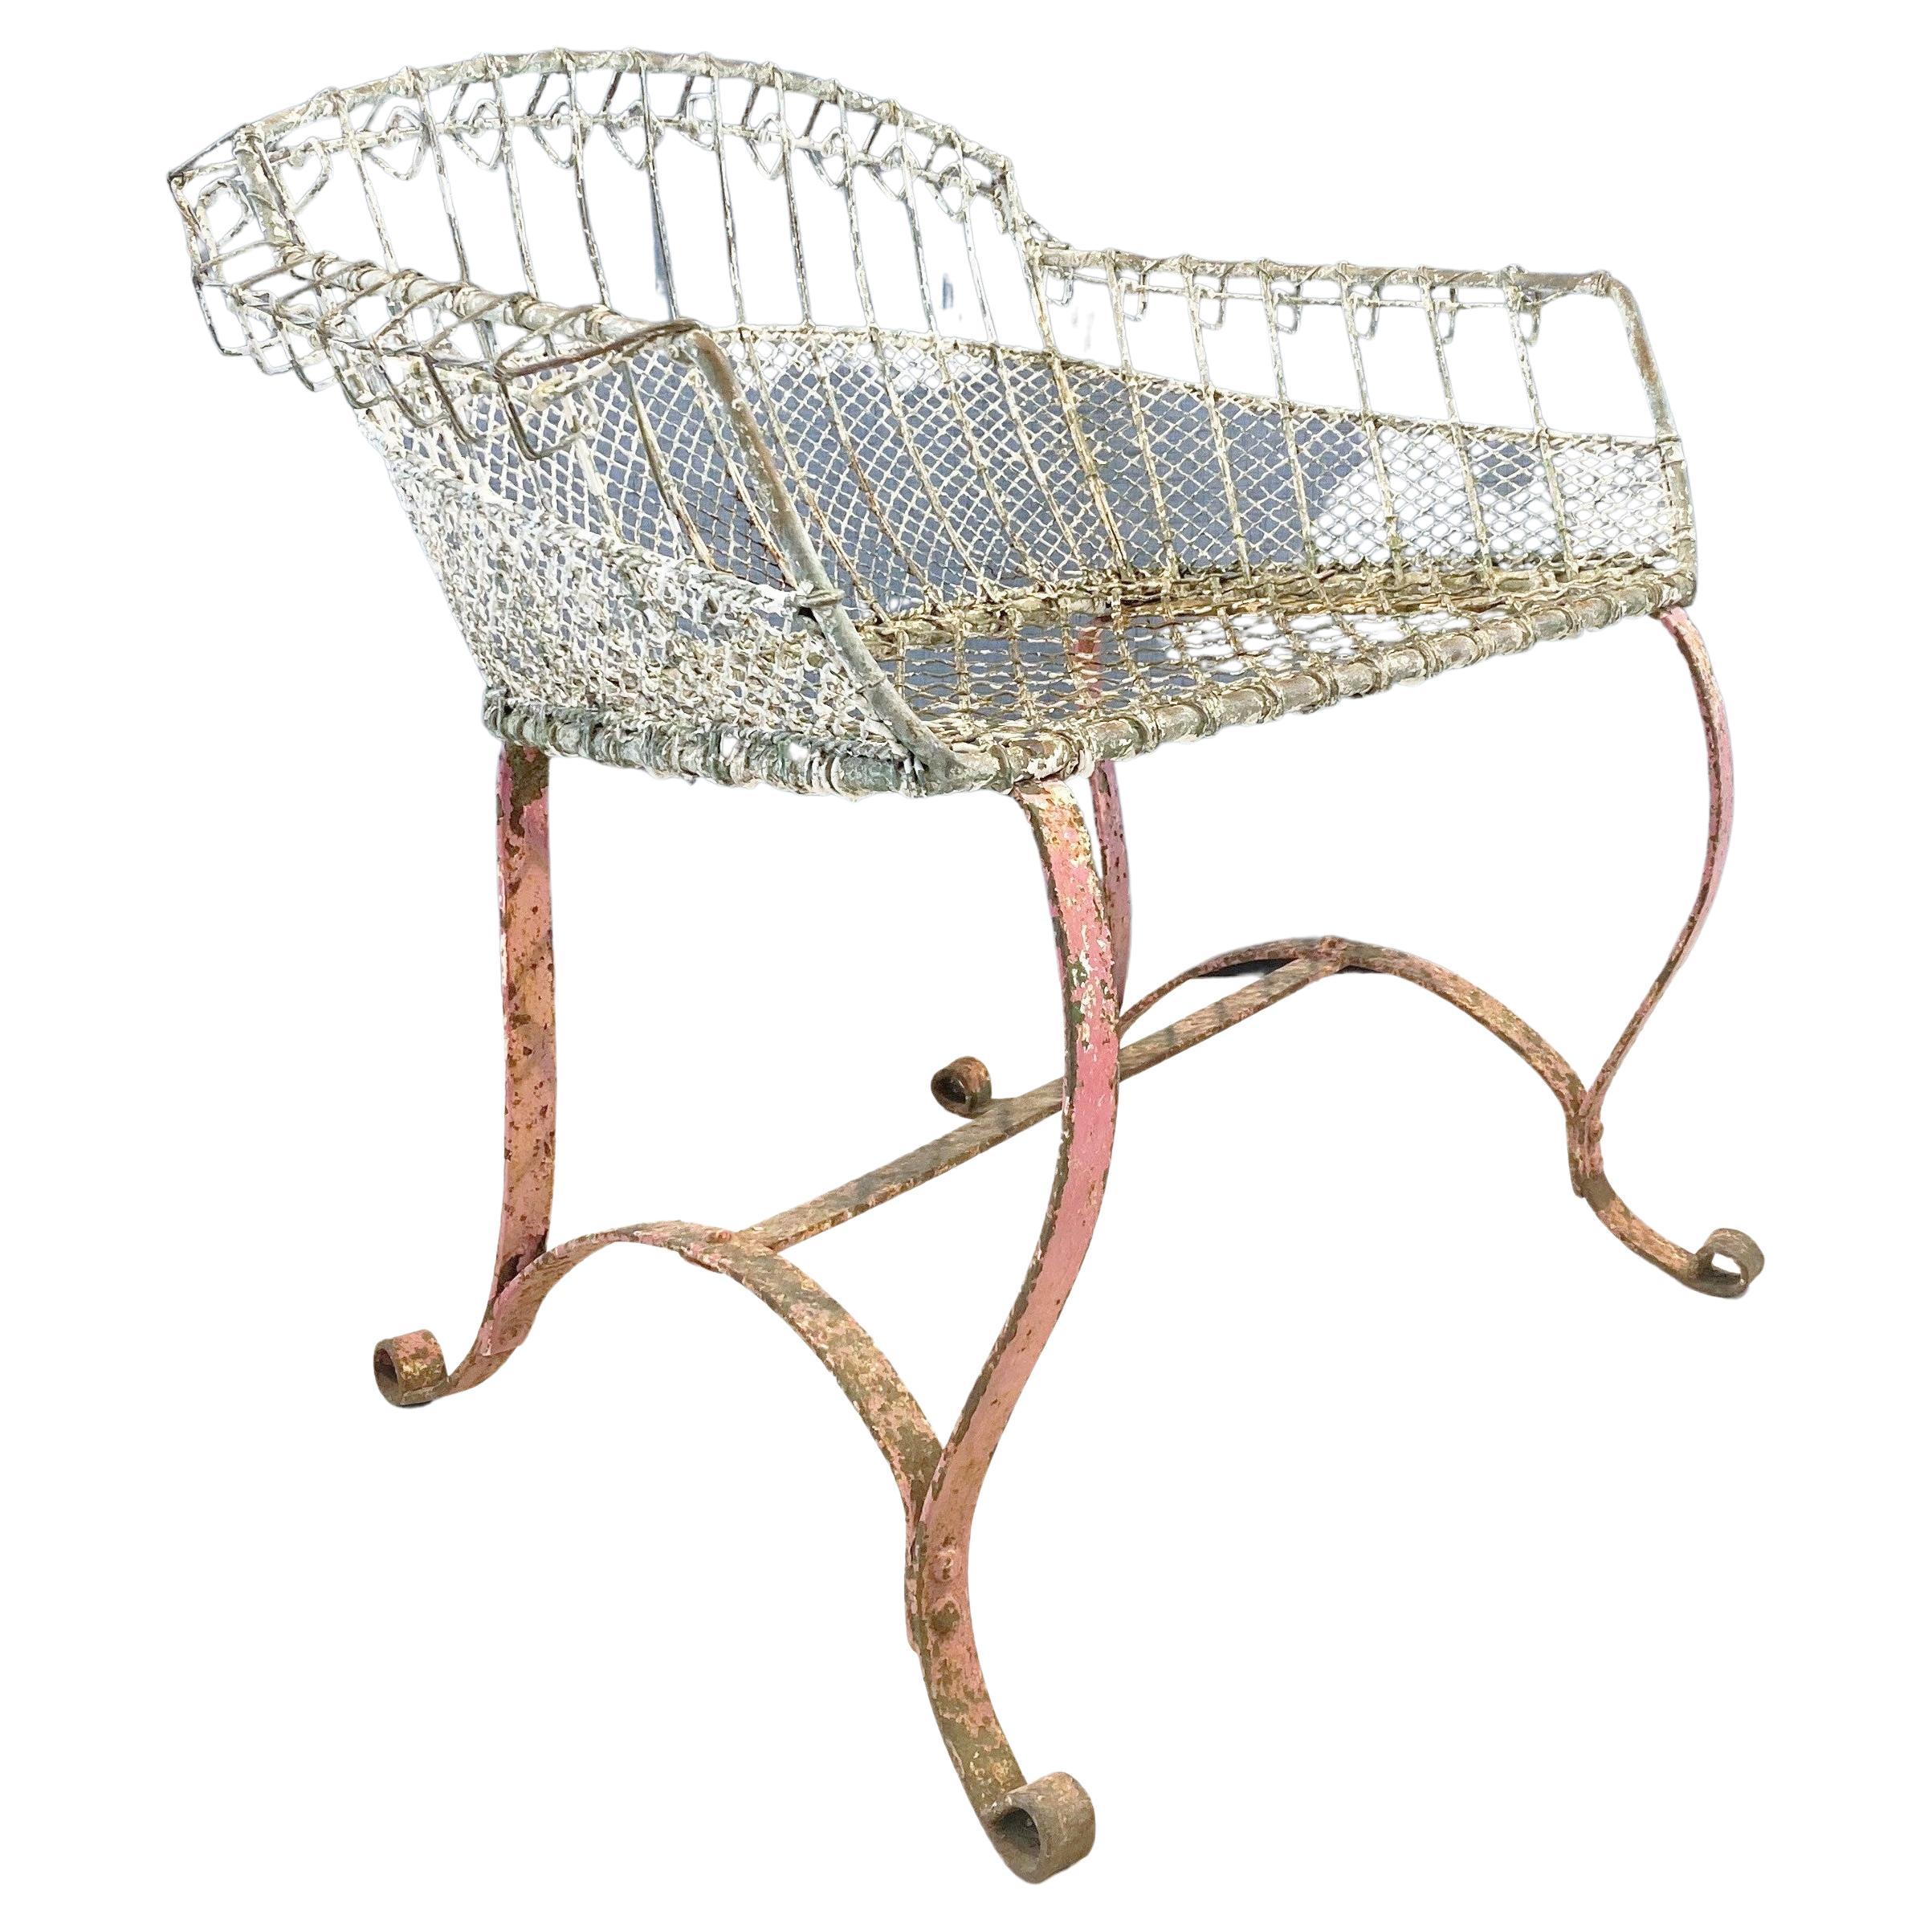 Rare 1920s Wirework Garden Seat with Scroll Wrought Iron Feet Aged Patina